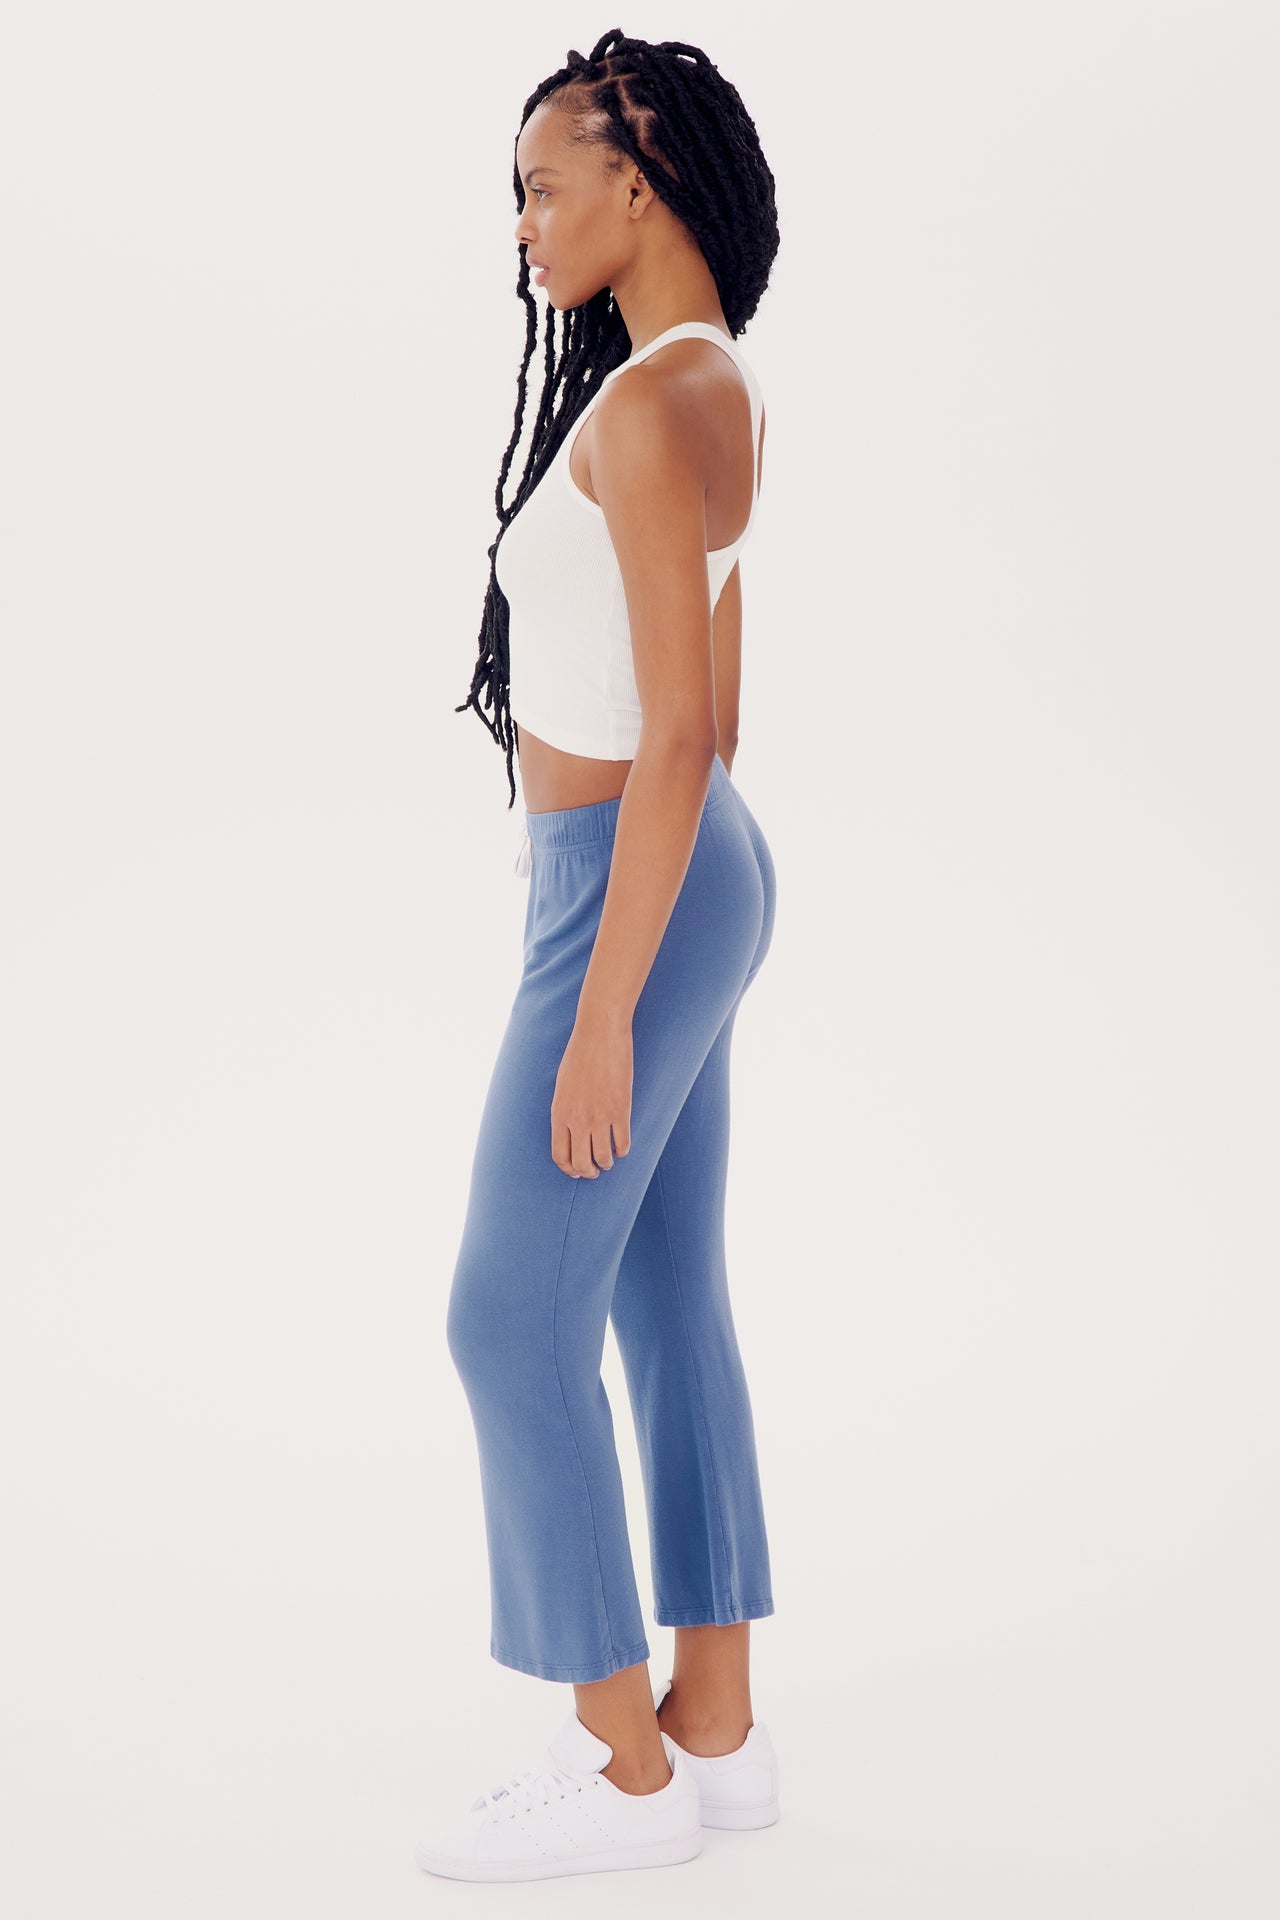 A woman in a white tank top and SPLITS59 Brooks Fleece Cropped Flare - Steel Blue pants stands in profile on a white background, wearing white sneakers.